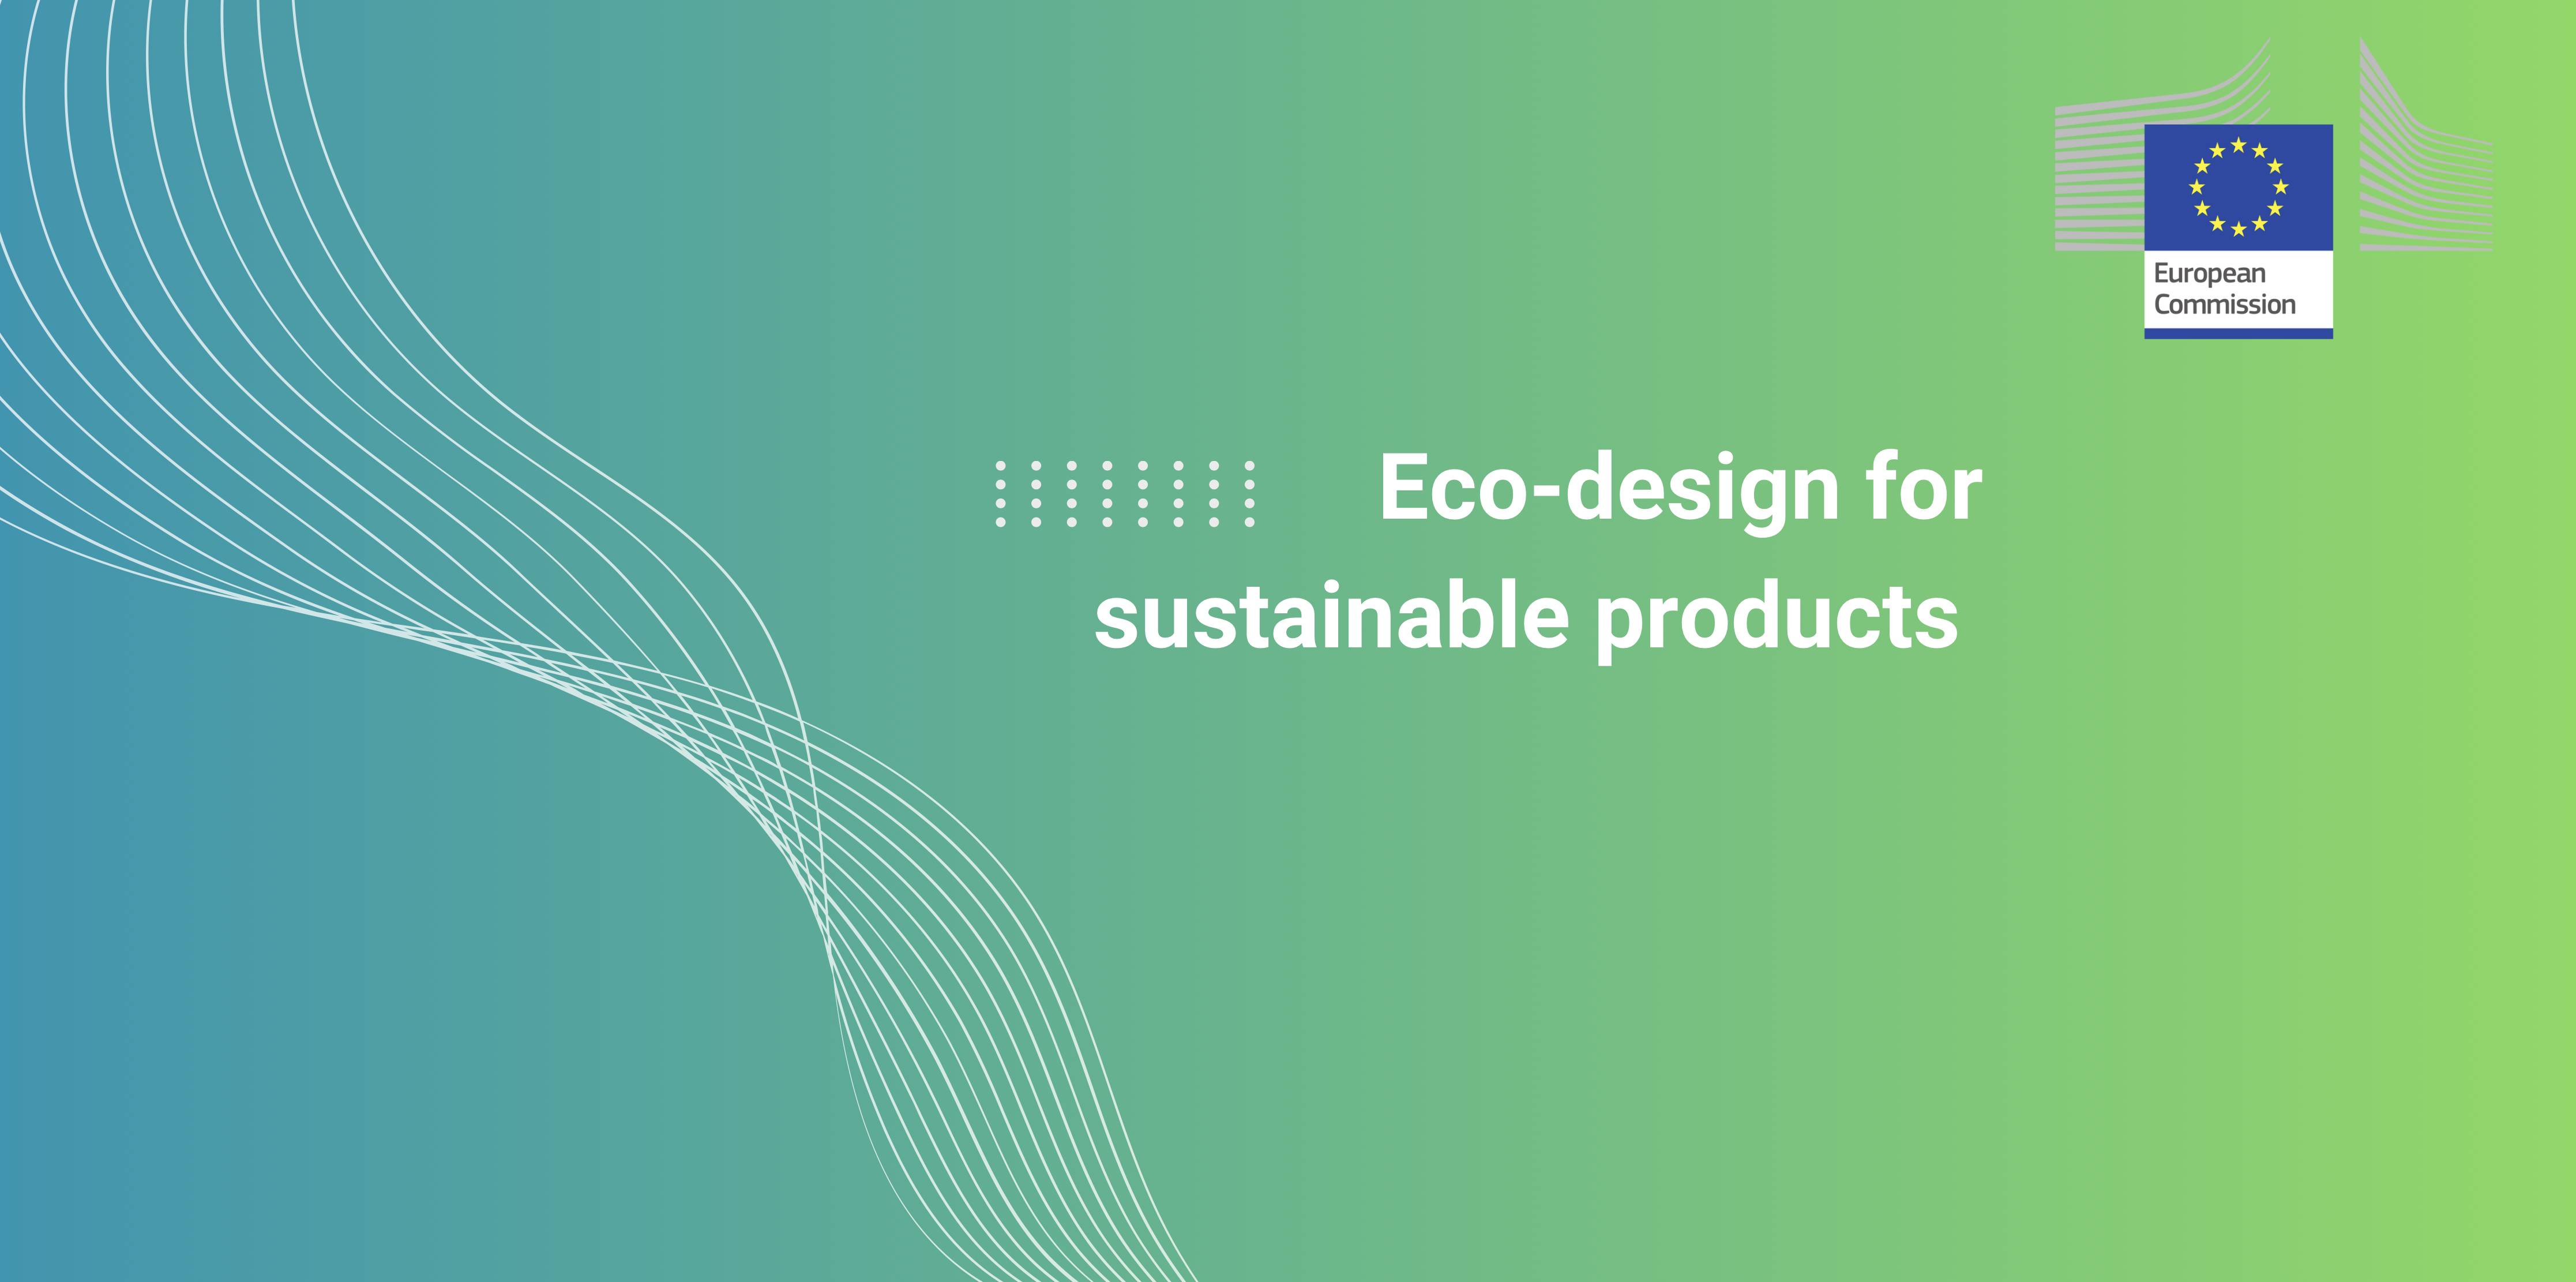 Ecodesign for sustainable products (PROPOSAL)